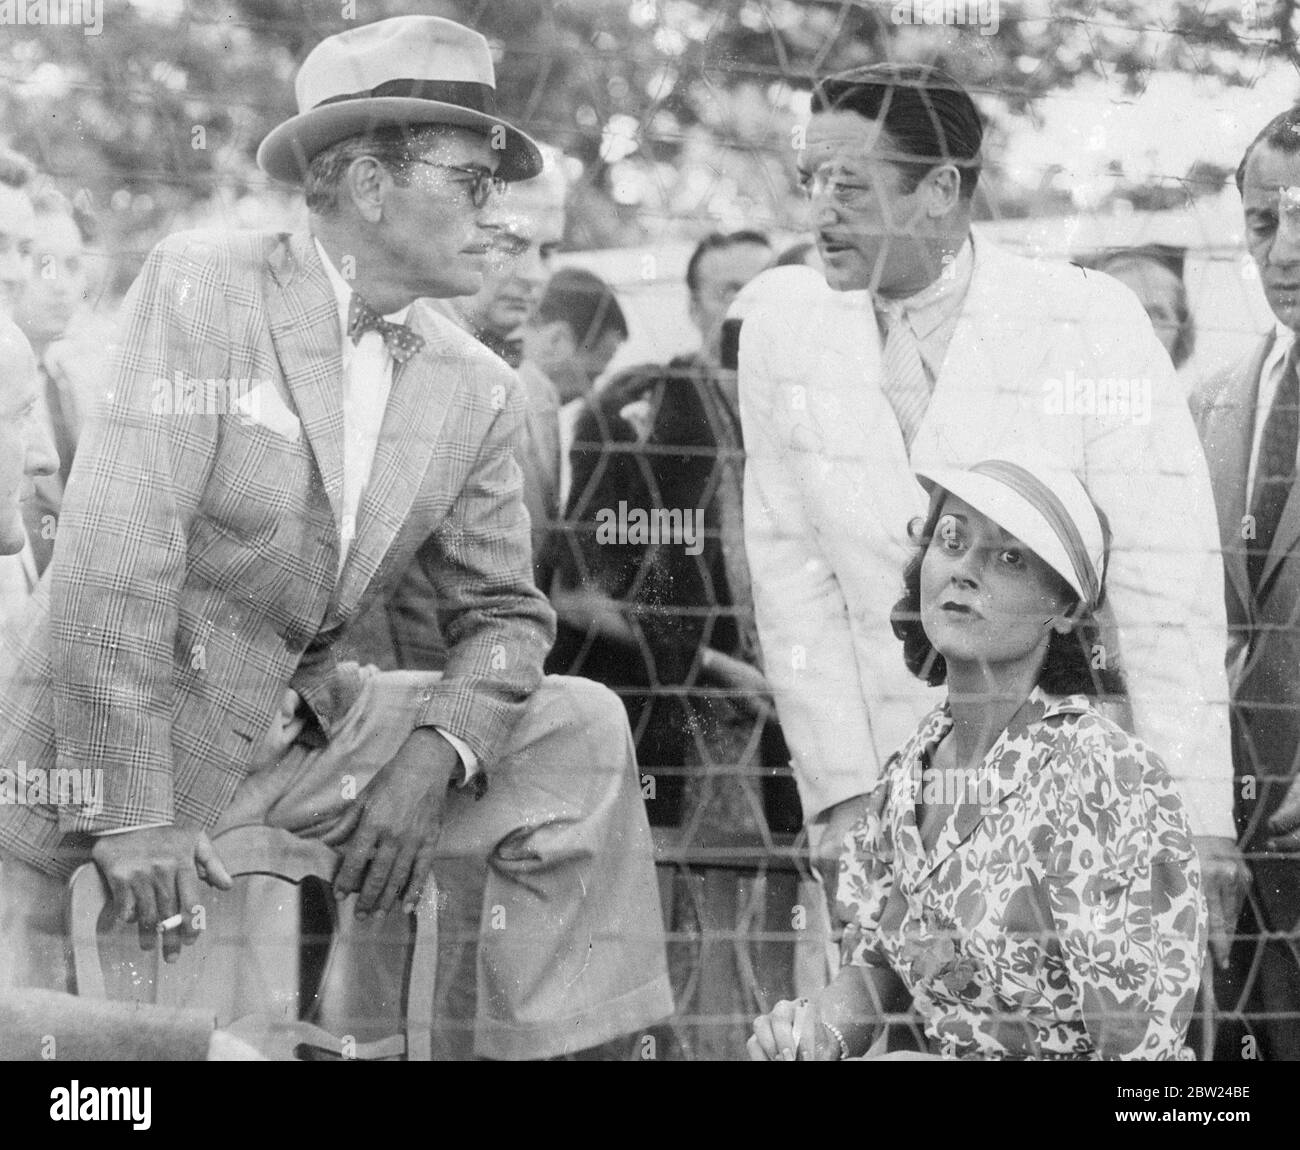 Ronald Colman and Benita Hume wed. Ronald Colman, the film actor, has been married to Miss Benita Hume, the British film actress, at Santa Barbara, California. Photo shows, Ronald Coleman and Benita Hume with Theodore von Eltz (left) at the Beverly Hills tennis club, California. Customers tennis club 1 October 1938 Stock Photo